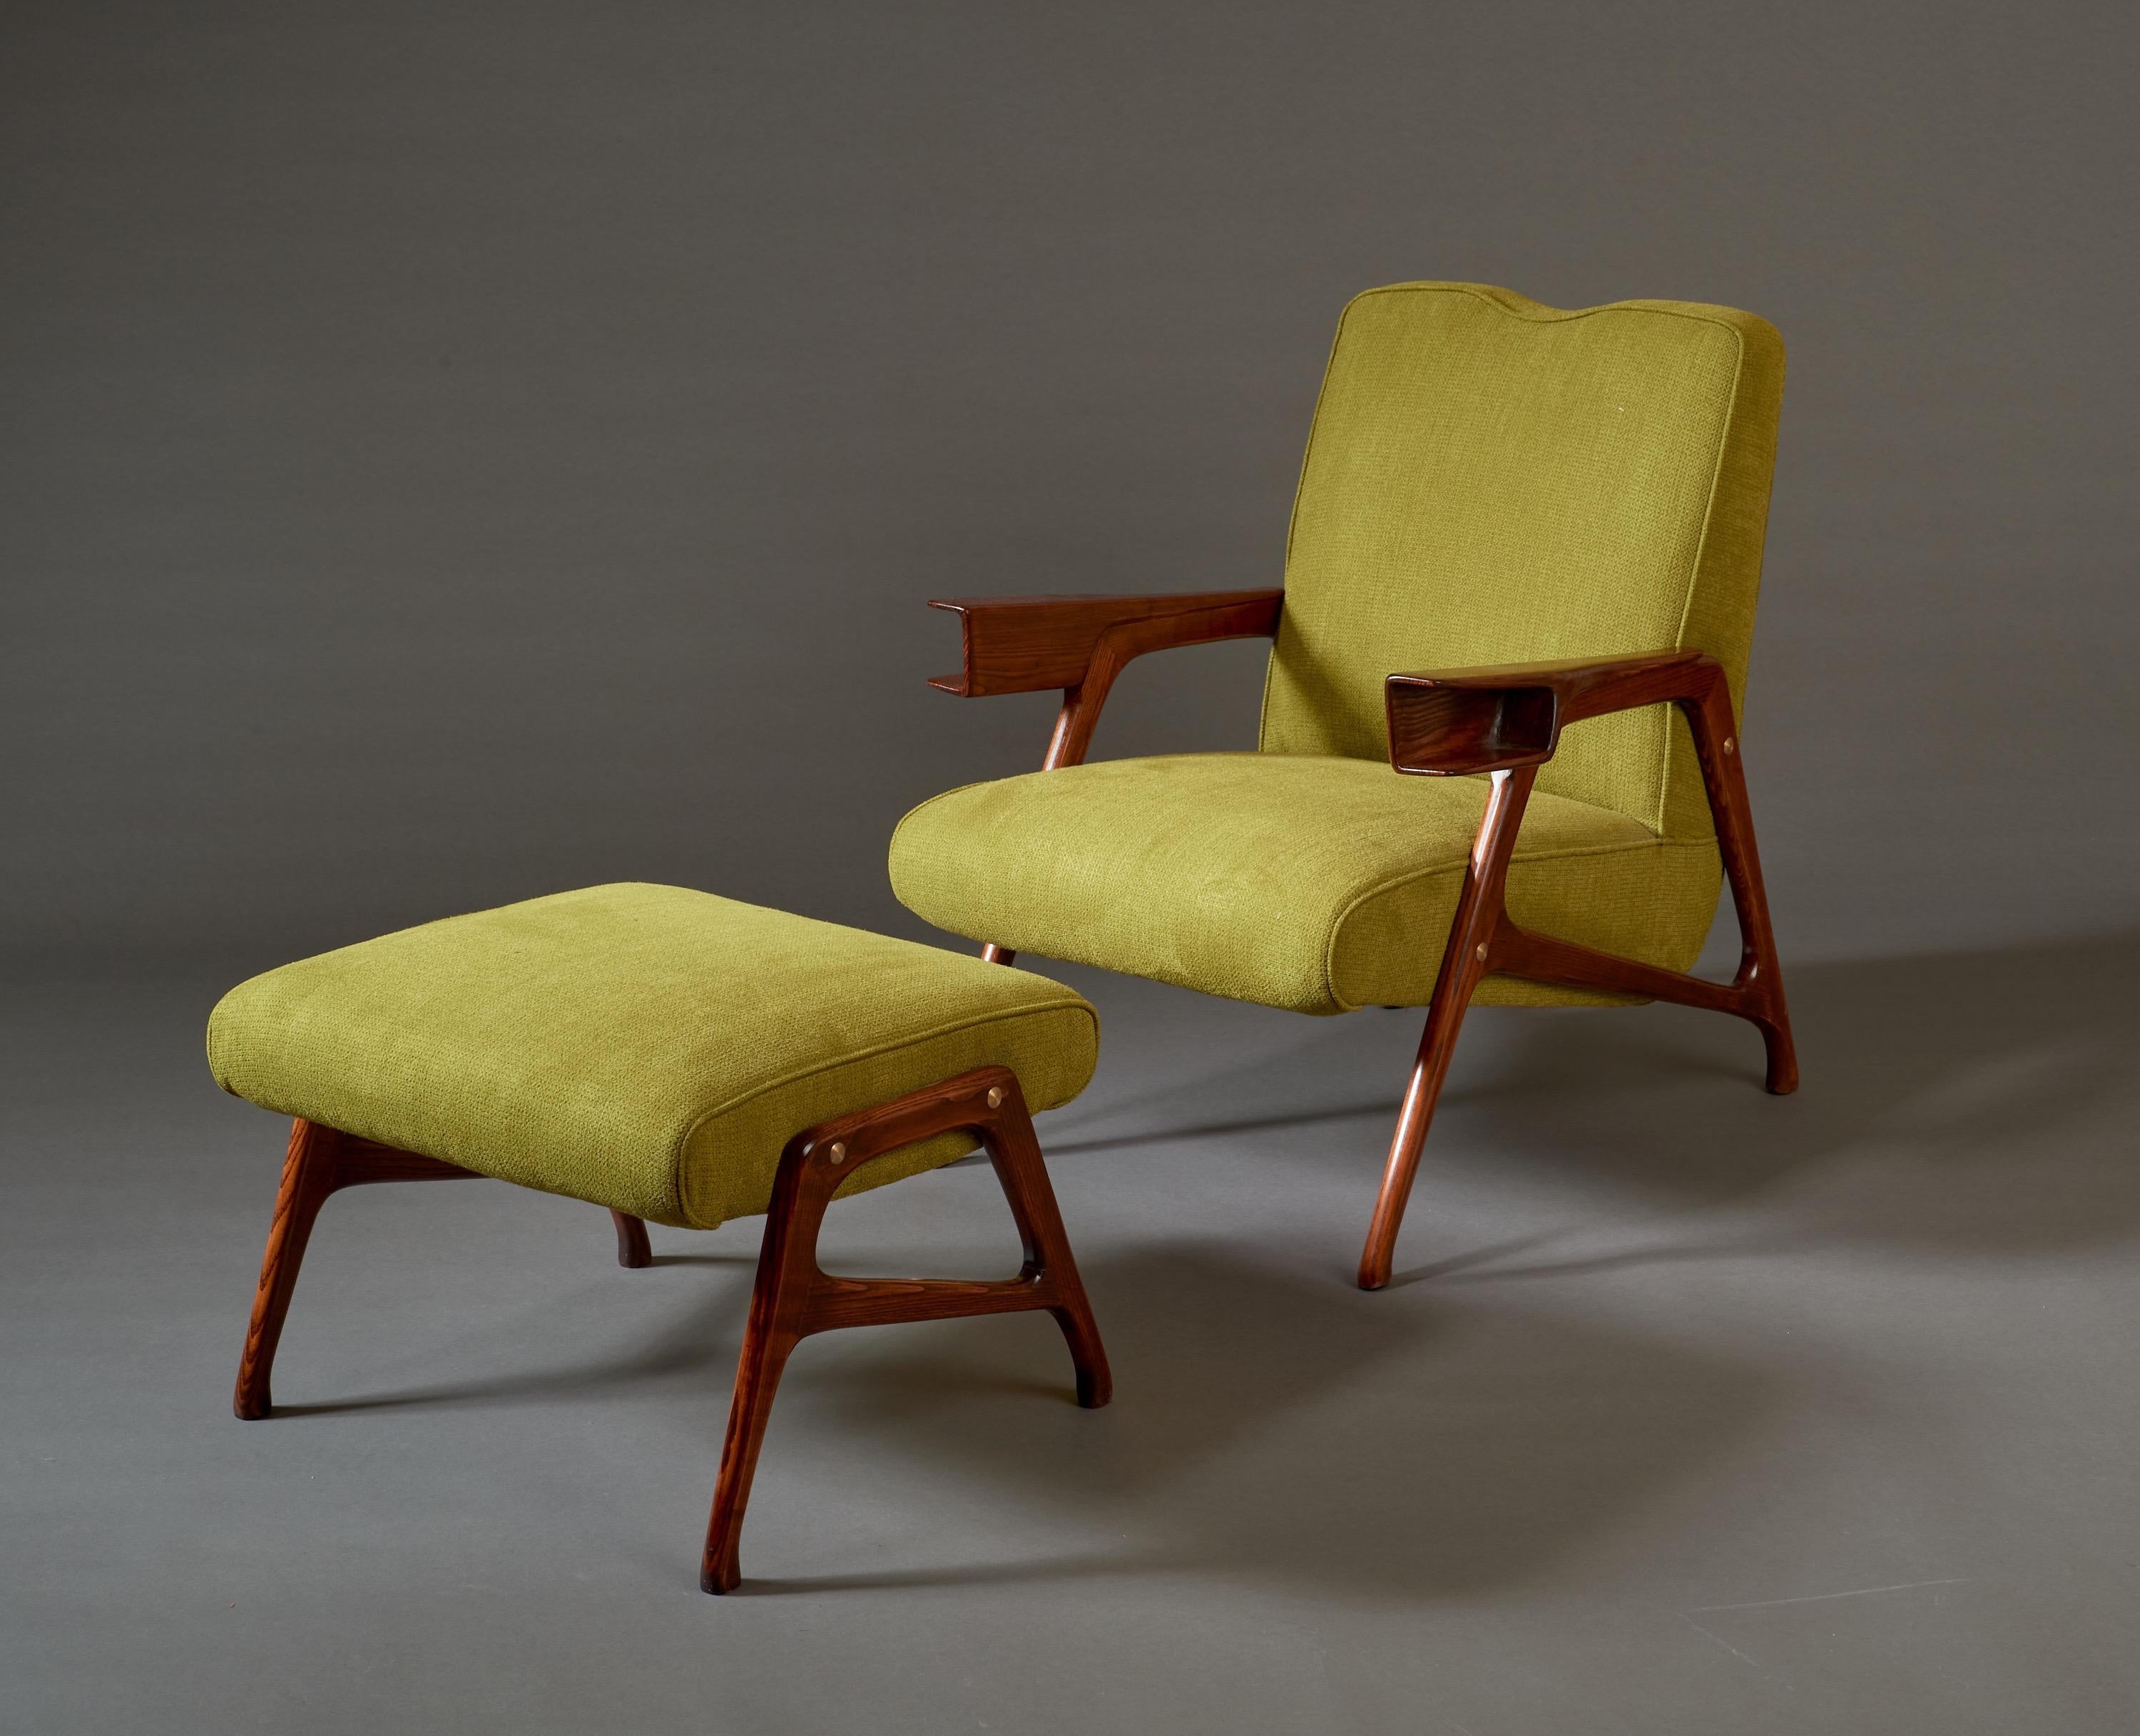 Augusto Romano (1918-2001)

A stunning armchair and ottoman set by Torinese modernist architect Augusto Romano, in mahogany with brass detailing, upholstered in a deep chartreuse. An architectonic, rounded A-line frame culminates in tapering legs